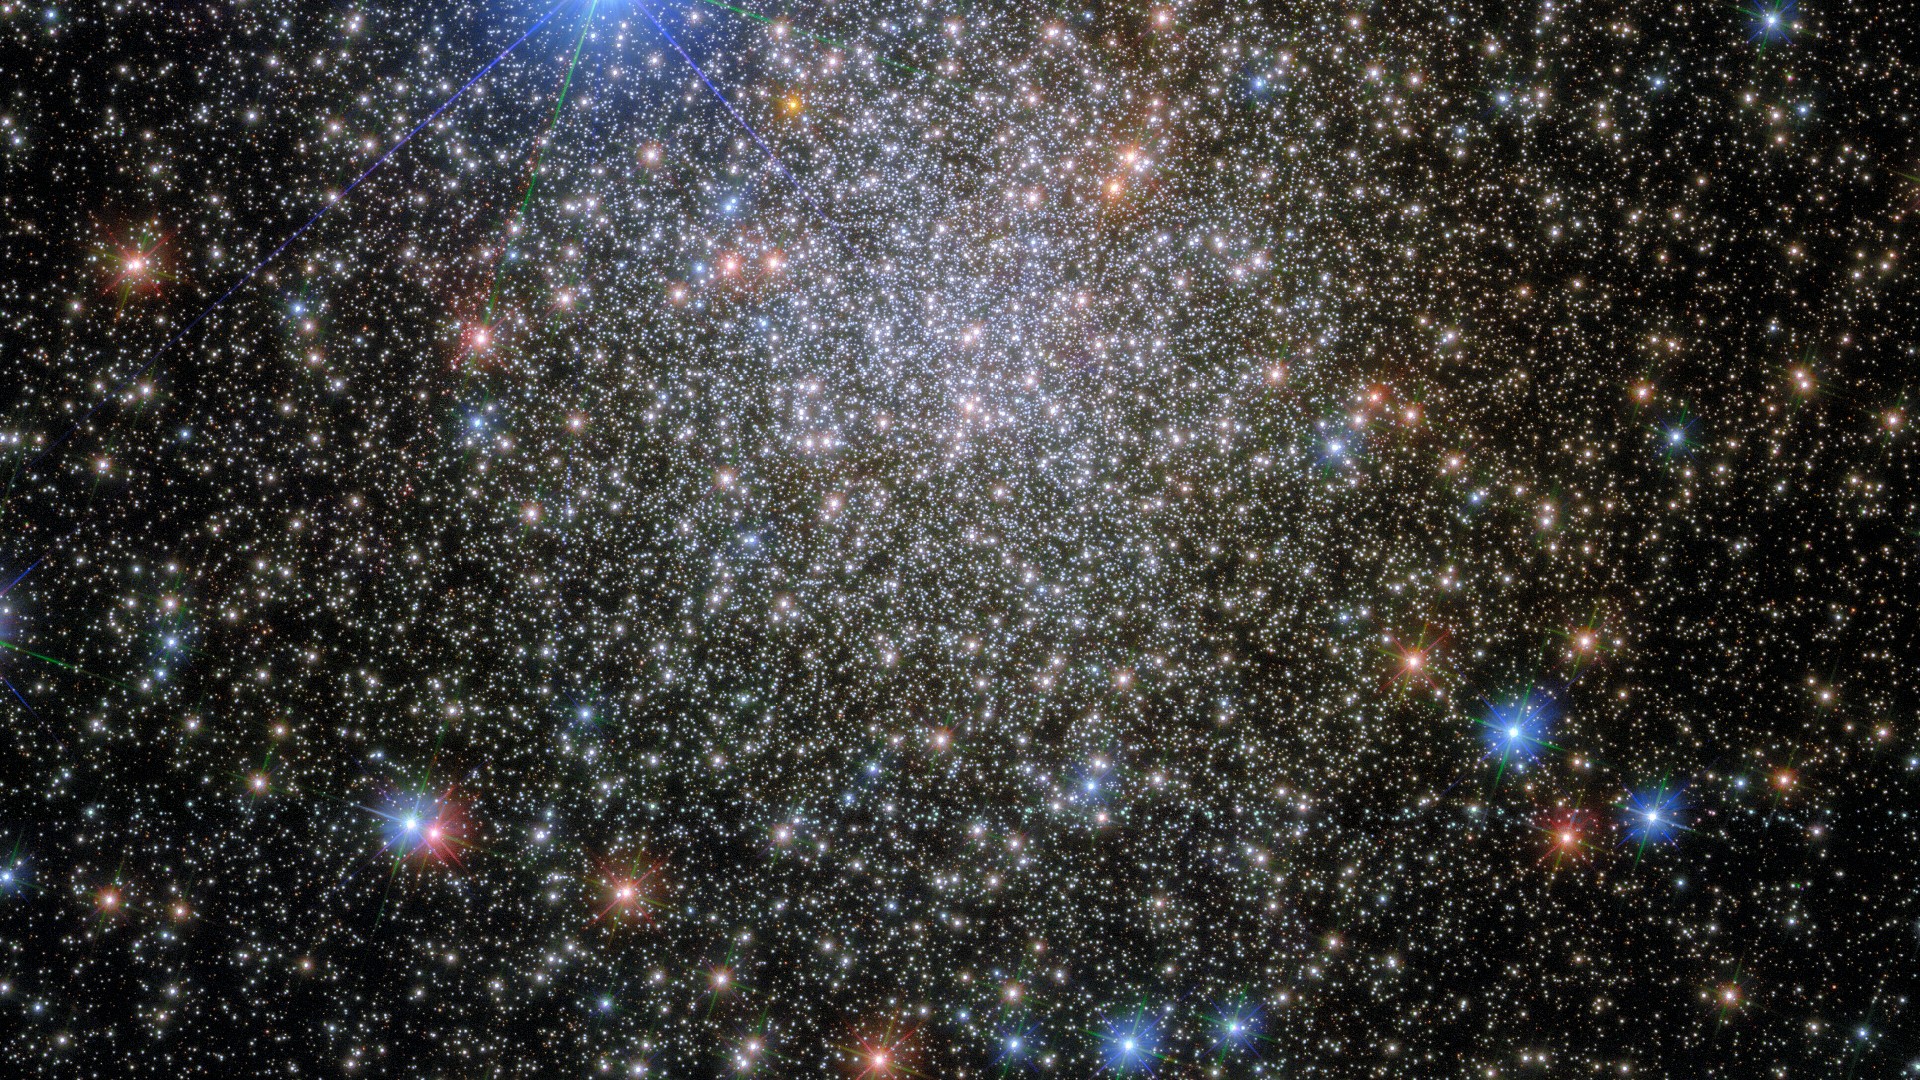 NASA’s New Hubble Share, Features A Brilliant, Crowded Starscape!